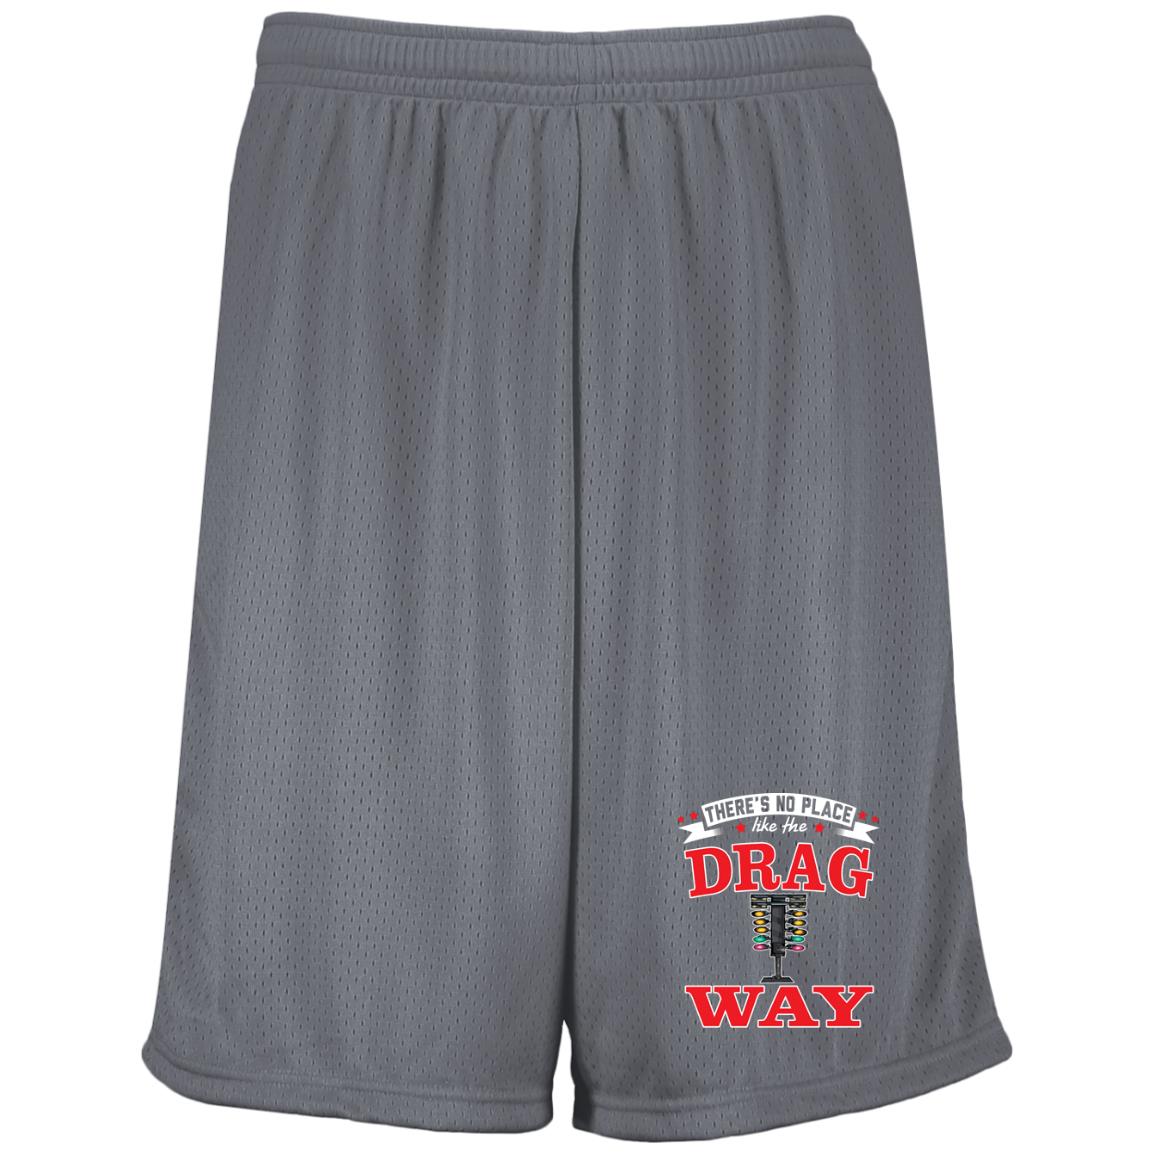 There's No Place Like The Dragway Moisture-Wicking 9 inch Inseam Mesh Shorts